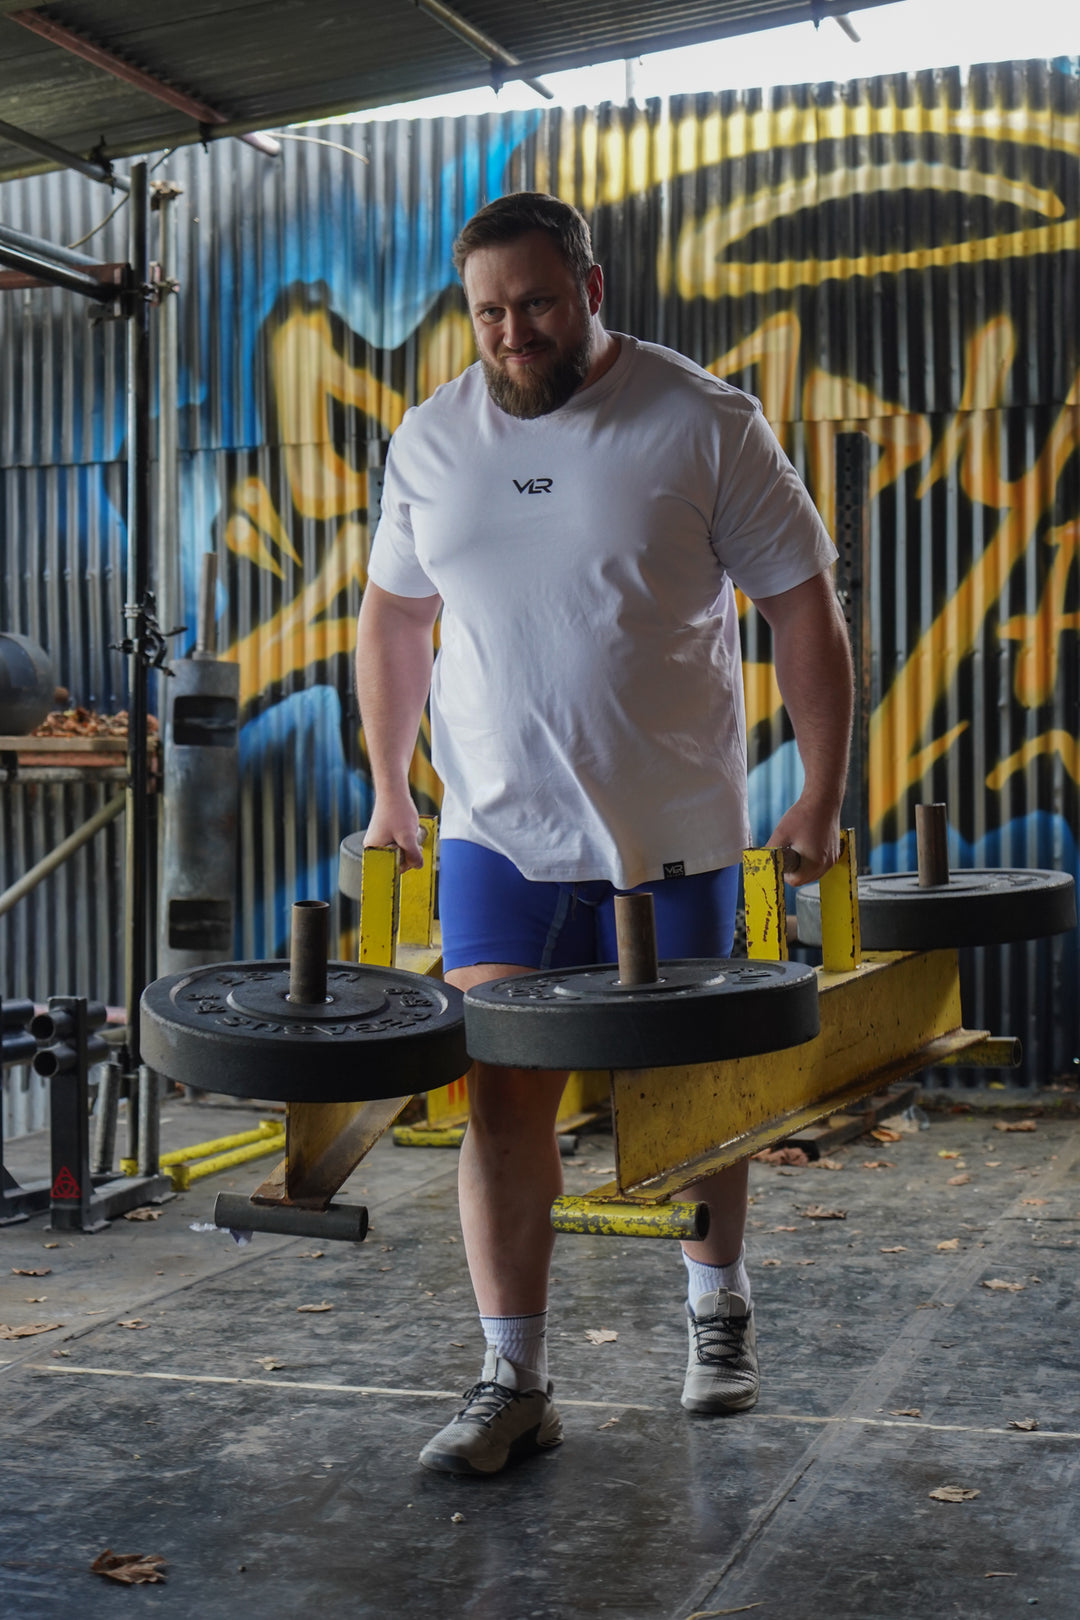 powerlifter holding weights